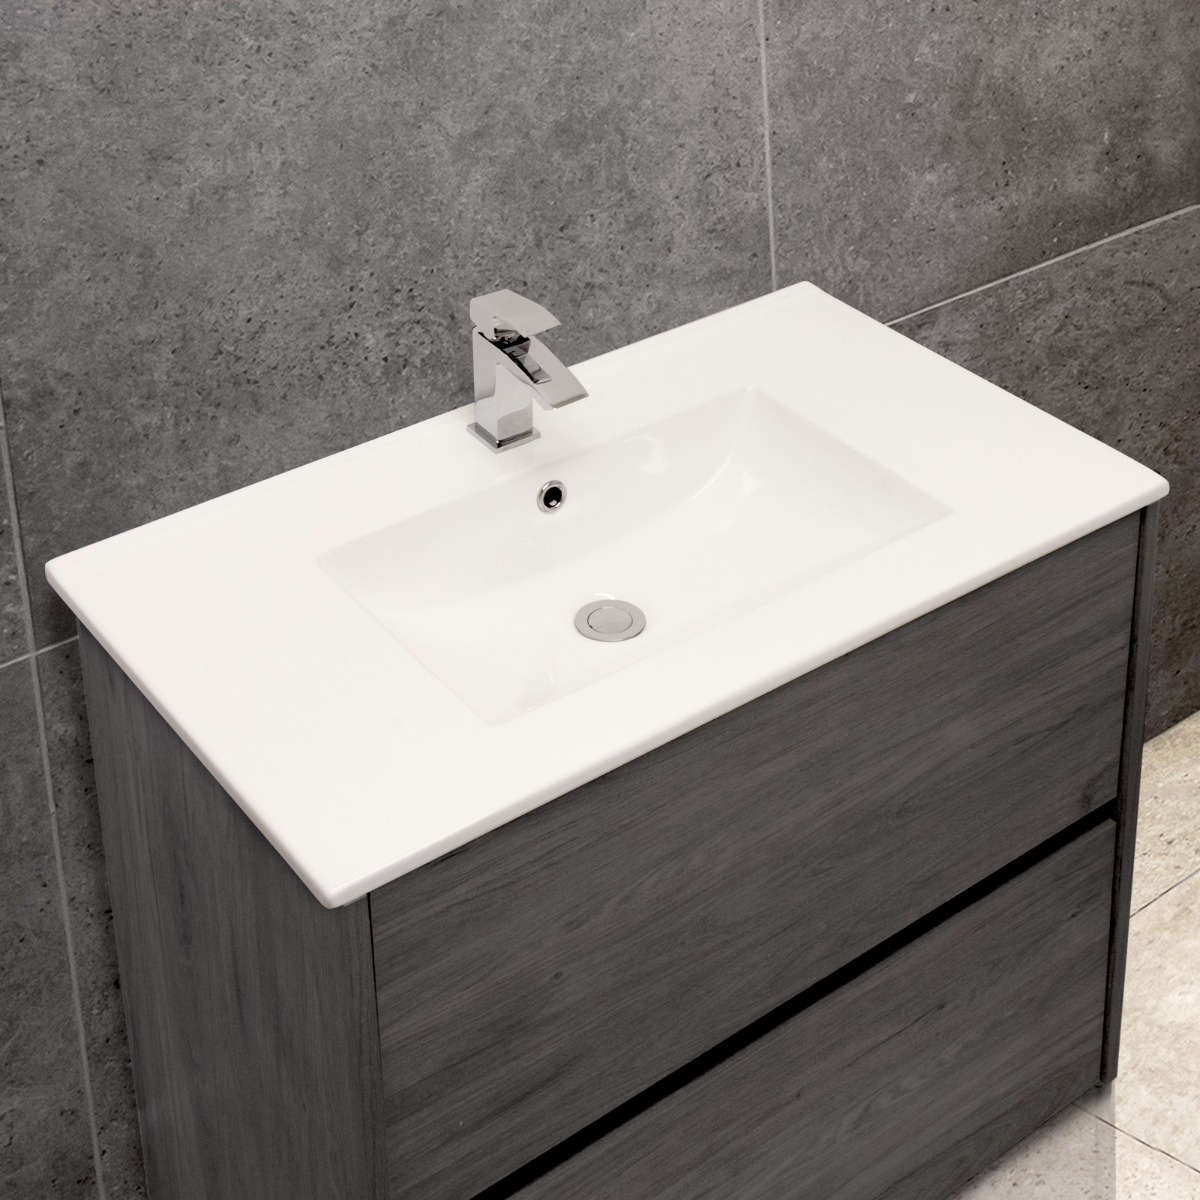 4001A Ceramic 81cm Thin-Edge Inset Basin with Scooped Bowl